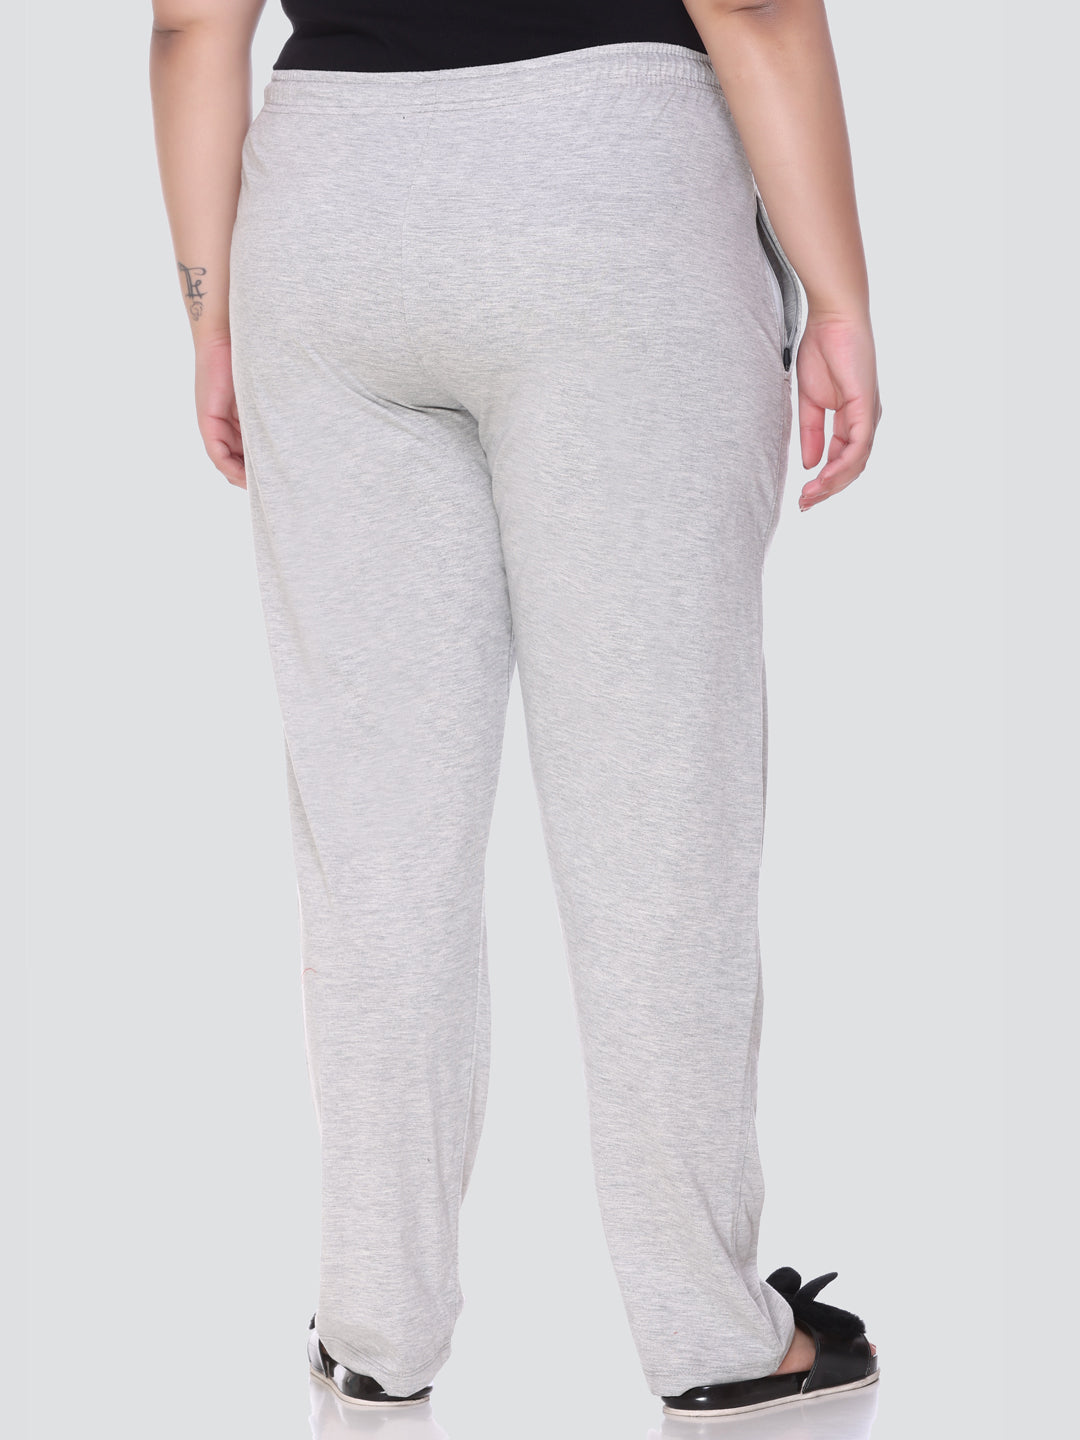 Stylish Cotton Track Pants For Women (Pack of 2) At Best Prices